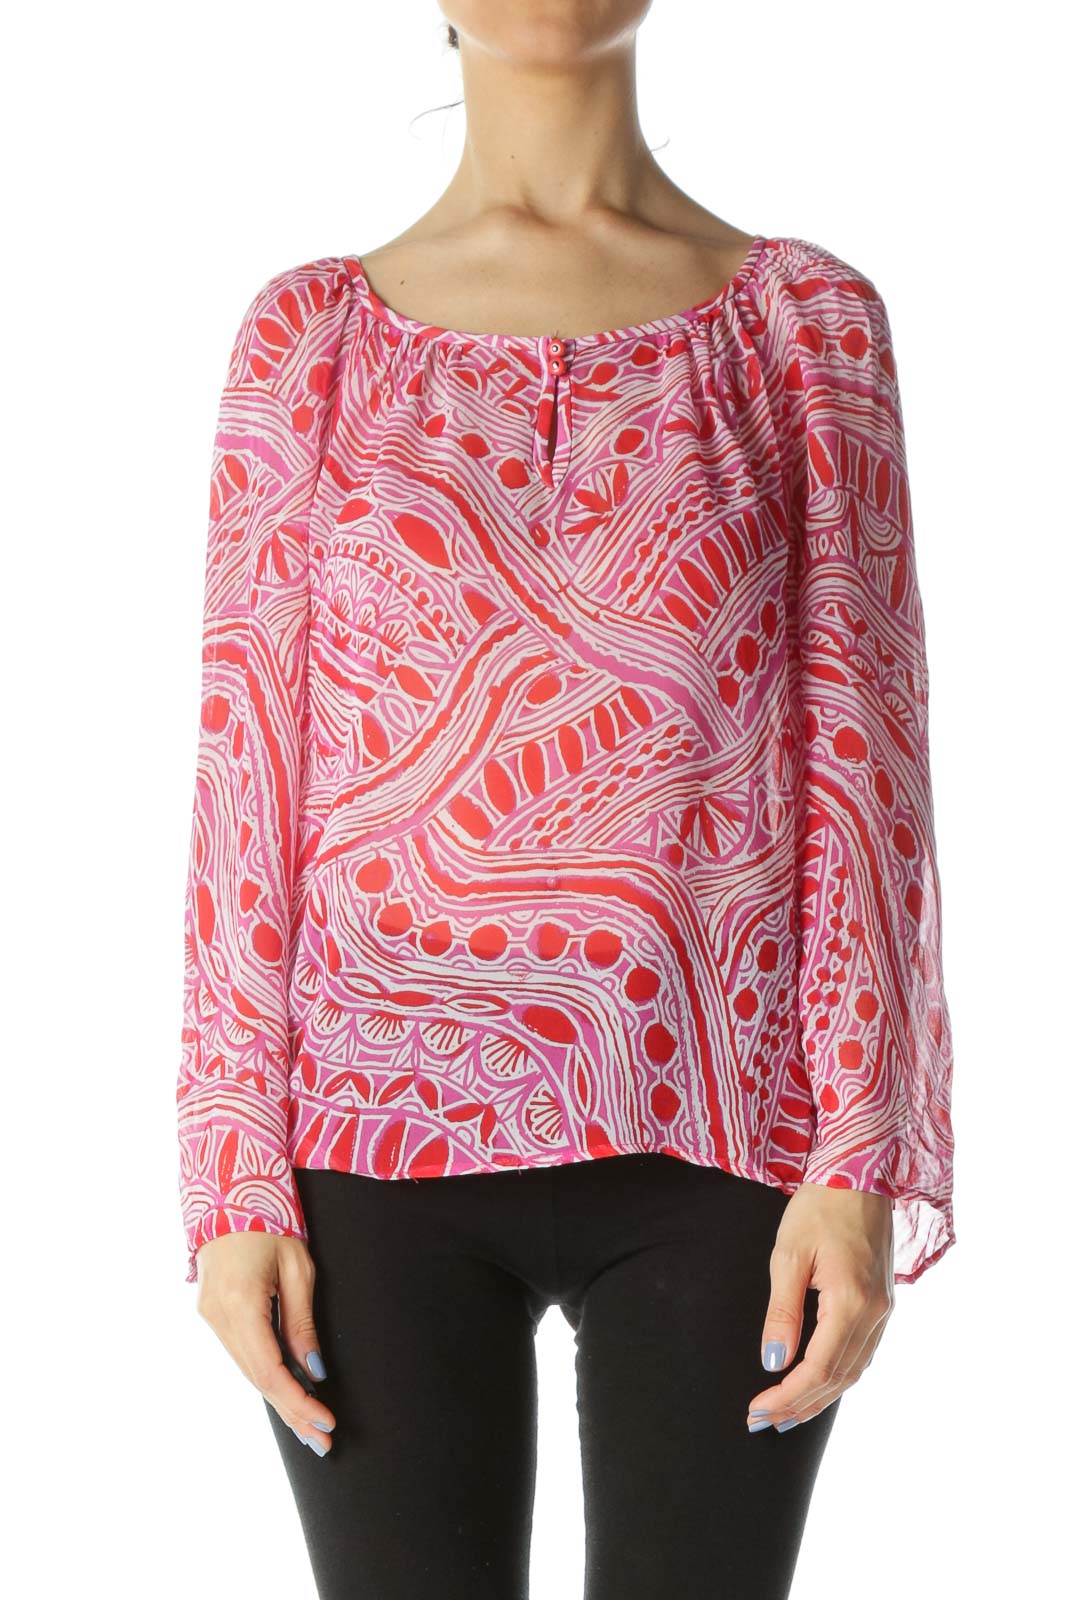 Red/Magenta-Pink/White Silk Print Keyhole See-Through Blouse Front